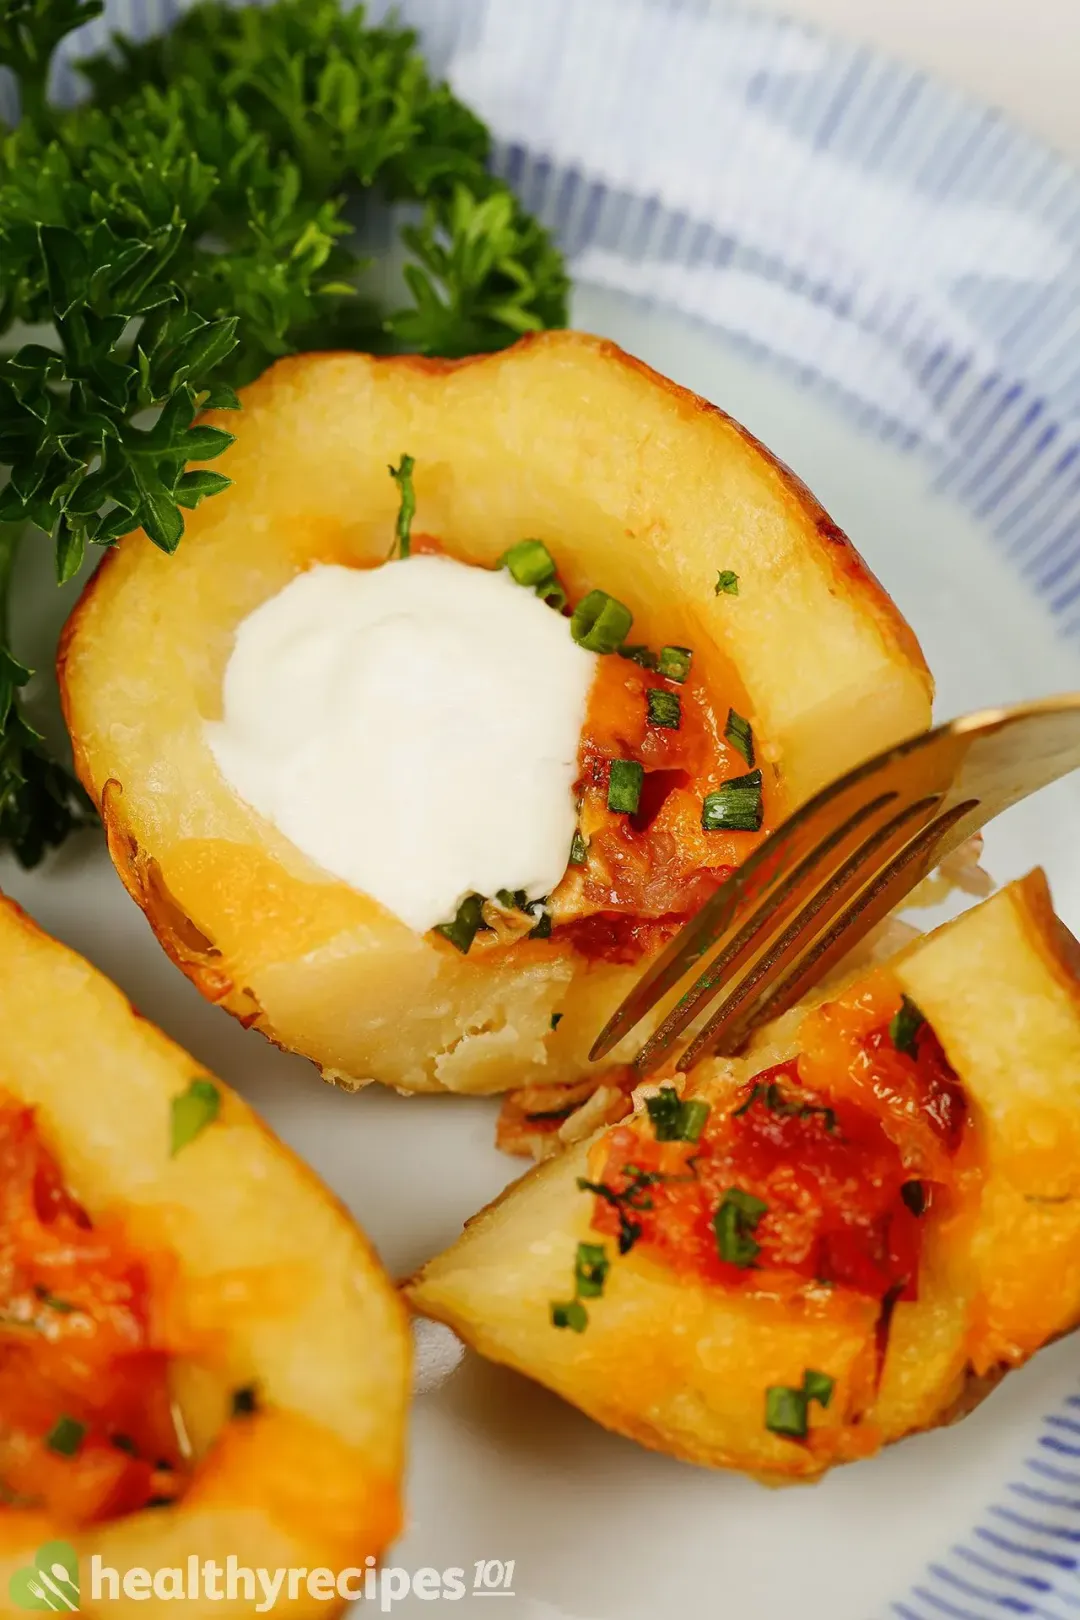 What Is a Potato Skins Recipe